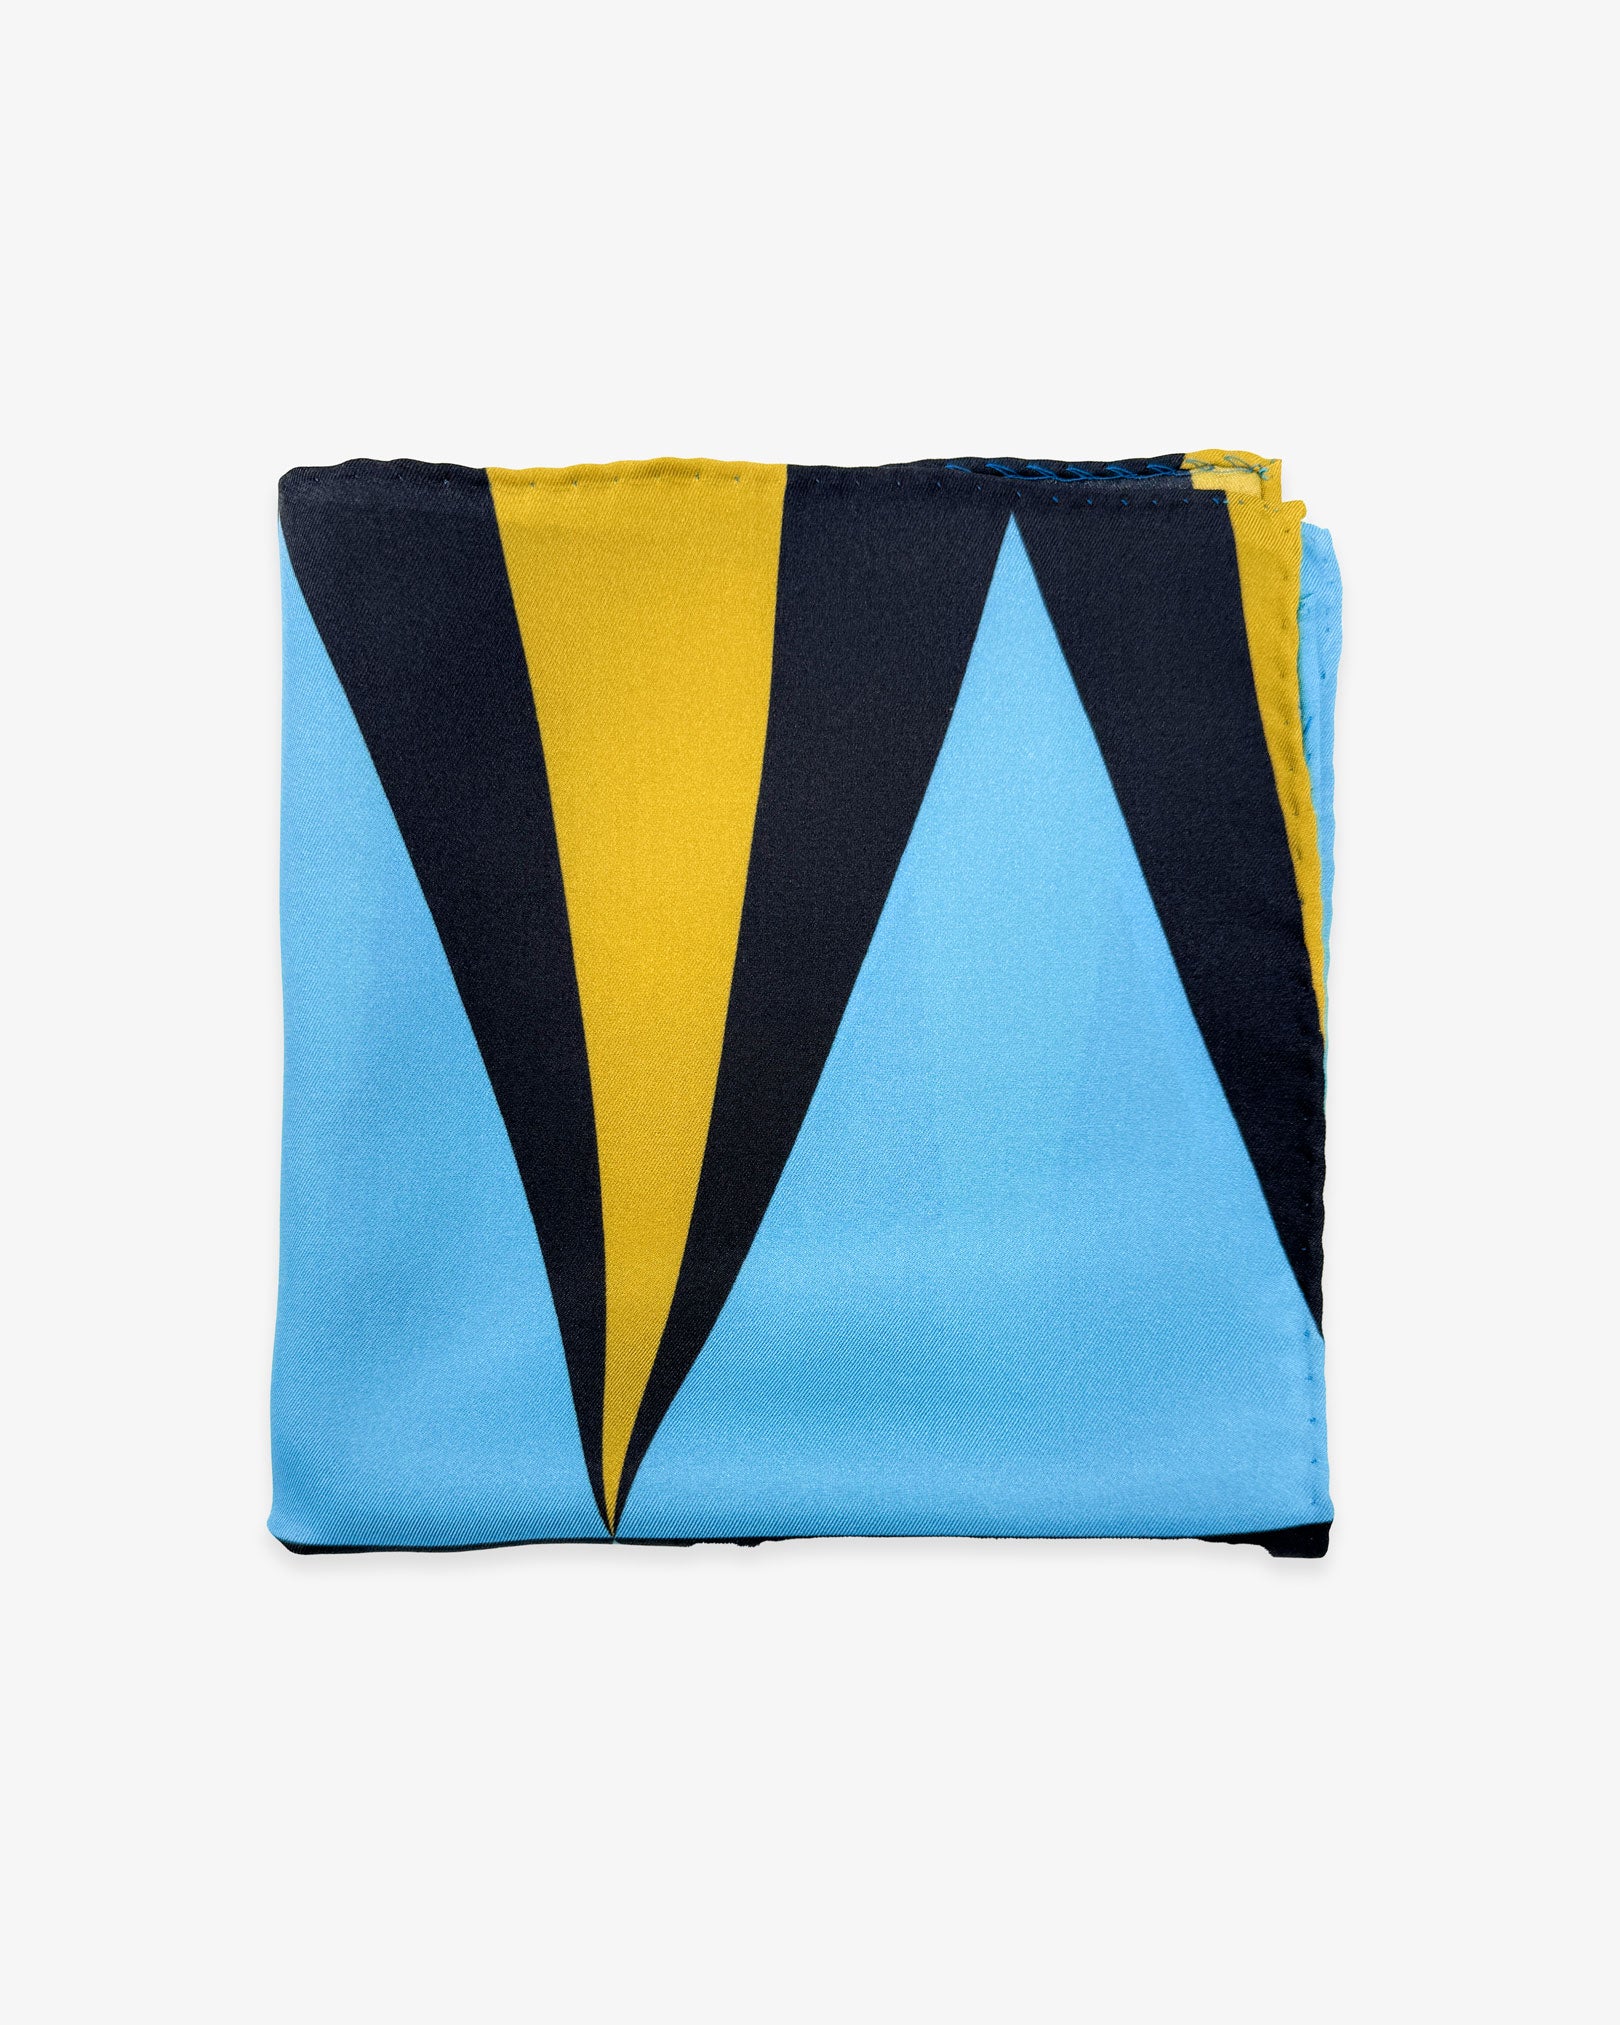 The 'Leipzig' silk pocket square from SOHO Scarves folded into a quarter, showing a portion of the bauhaus-inspired triangular forms.